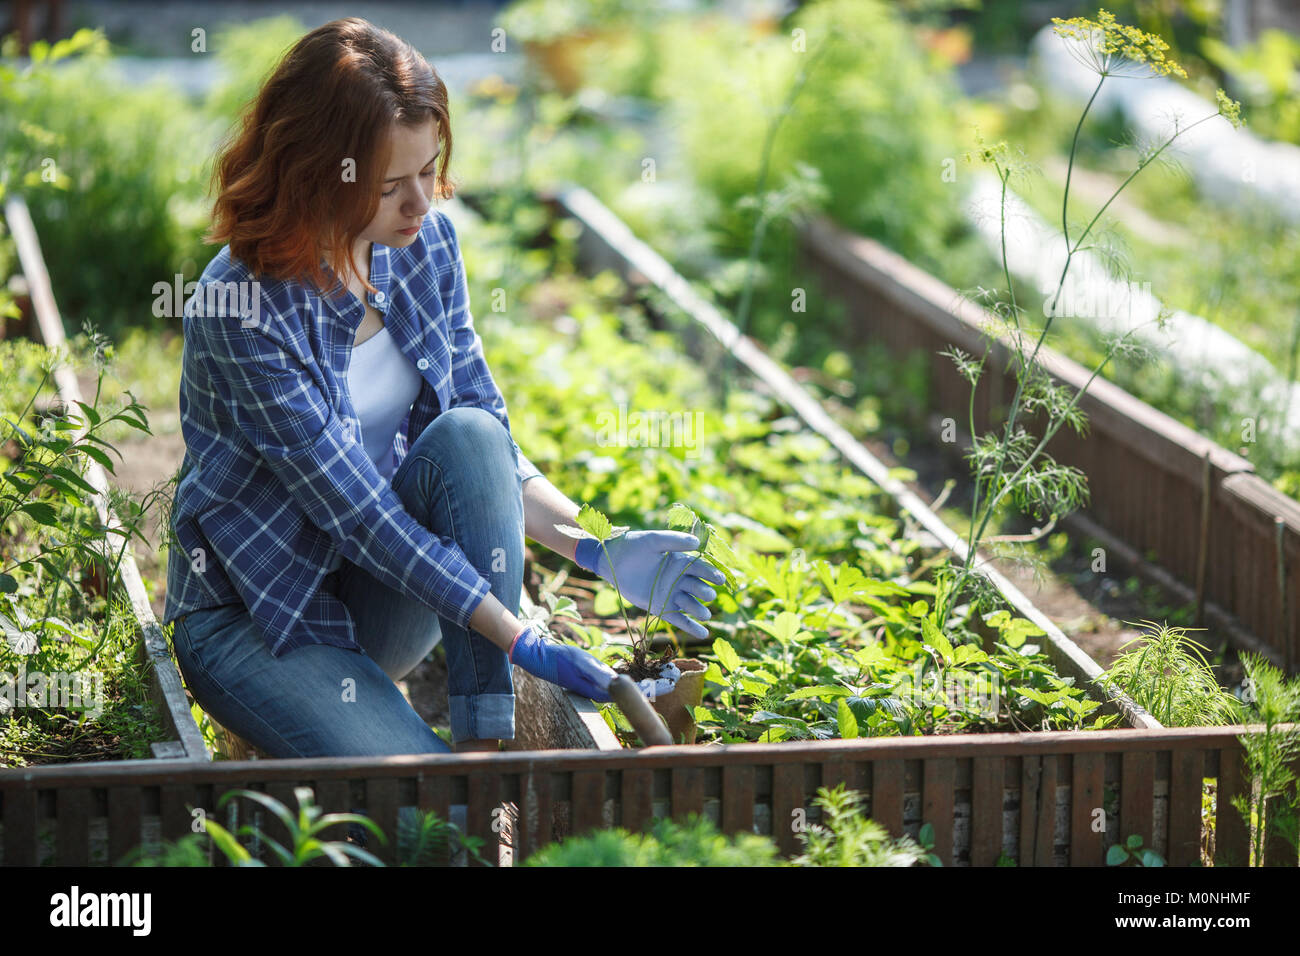 Young woman planting strawberry plant in garden Stock Photo